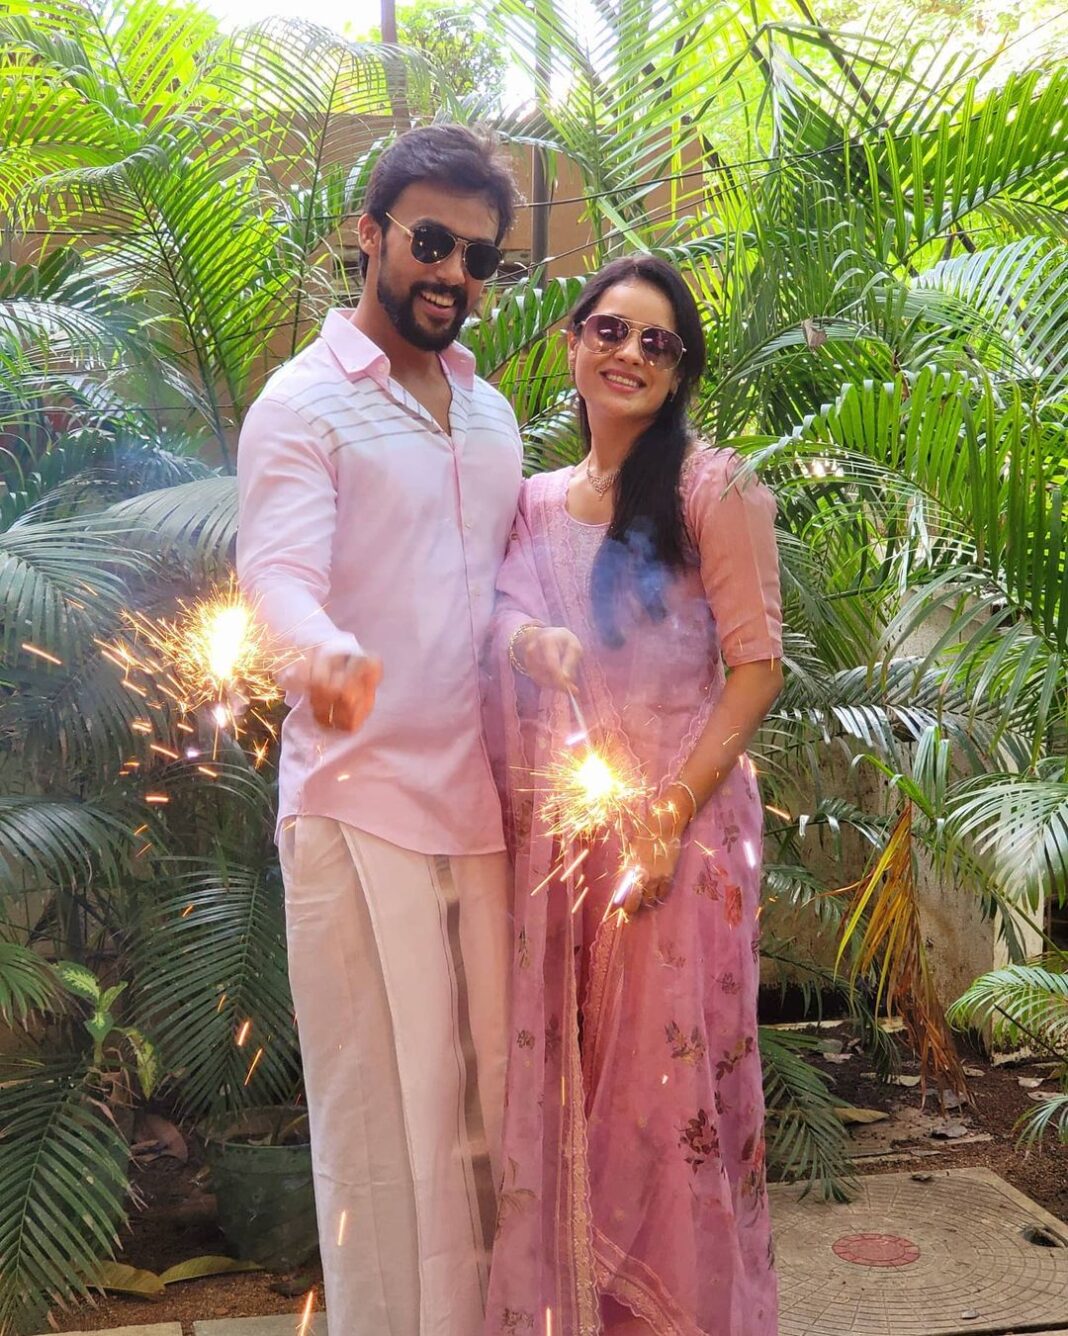 Arav Instagram - Diwali has always been special to me since childhood. This year its more special to us, being our Thala Diwali. Let this festival of Light, lit our lives with positivity. Happy Diwali to all of you from @raahei and me. இனிய தீபாவளி நல்வாழ்த்துக்கள் Have a safe one. Ever grateful to all your Love and Support Love❤️ AravRaahei #AravRaahei #arav #diwali #thaladiwali #positivity #gratitude